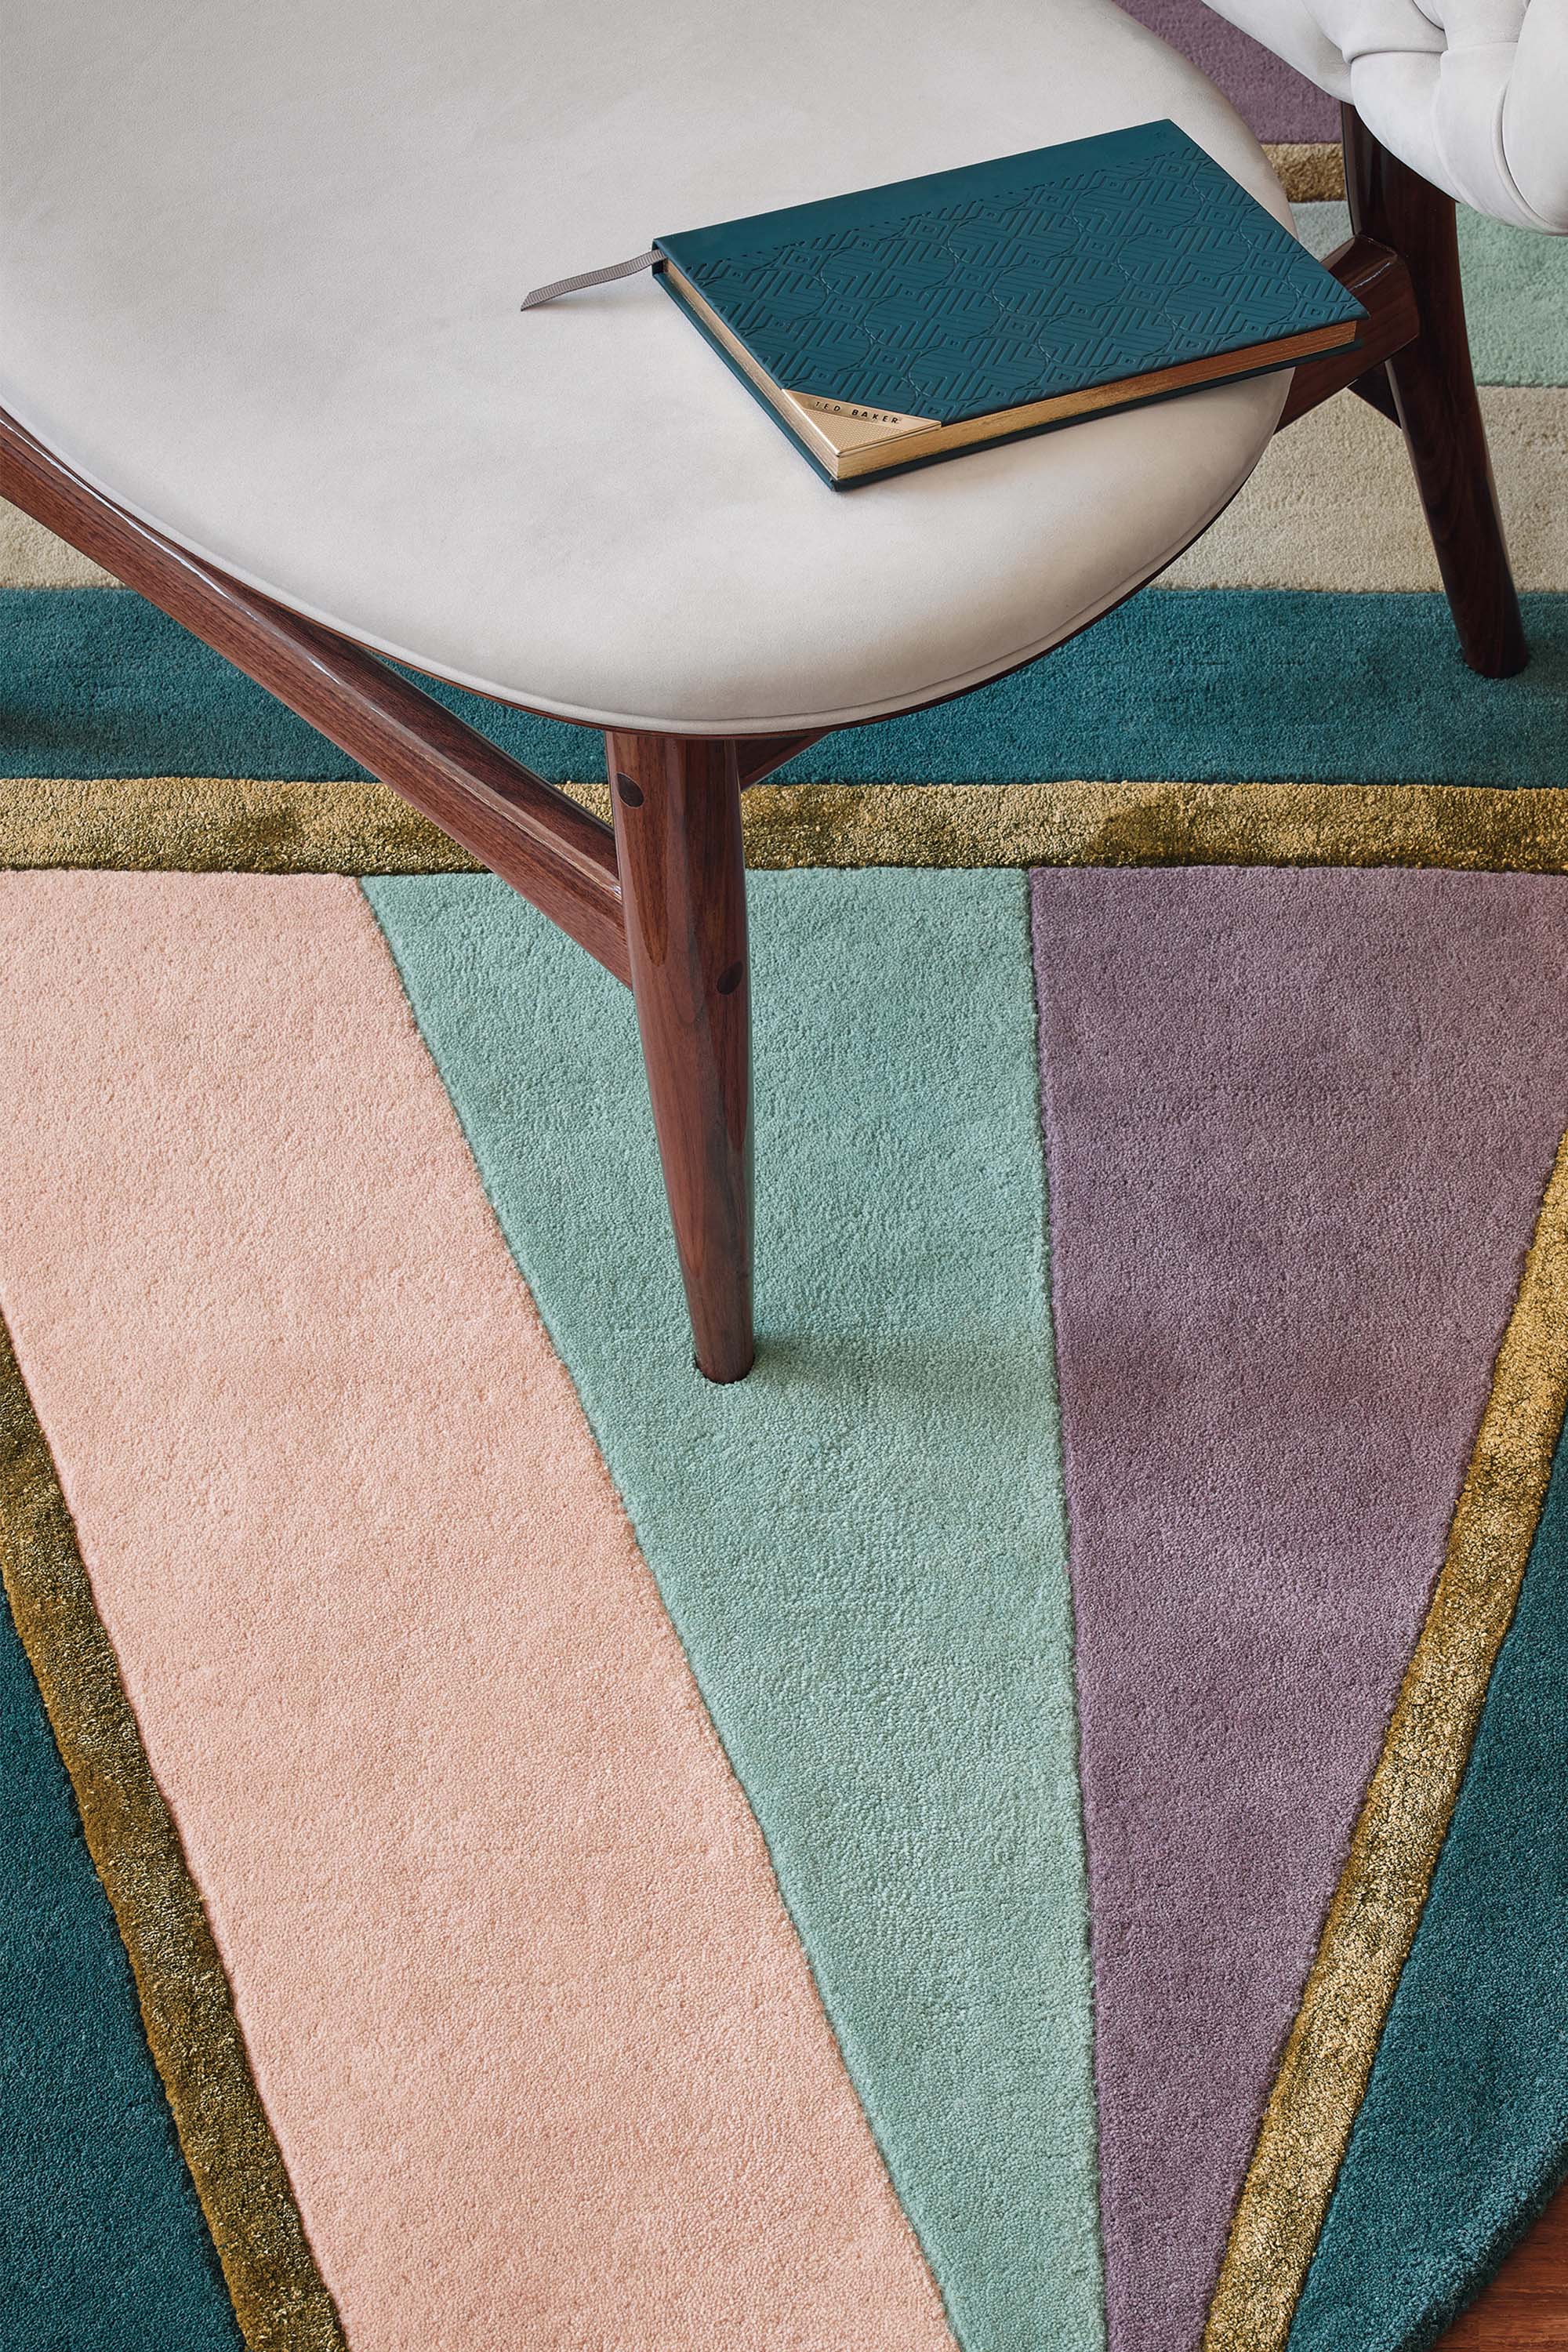 Rectangular rug with geometric stripe pattern in green, teal, grey and purple. Gold details.